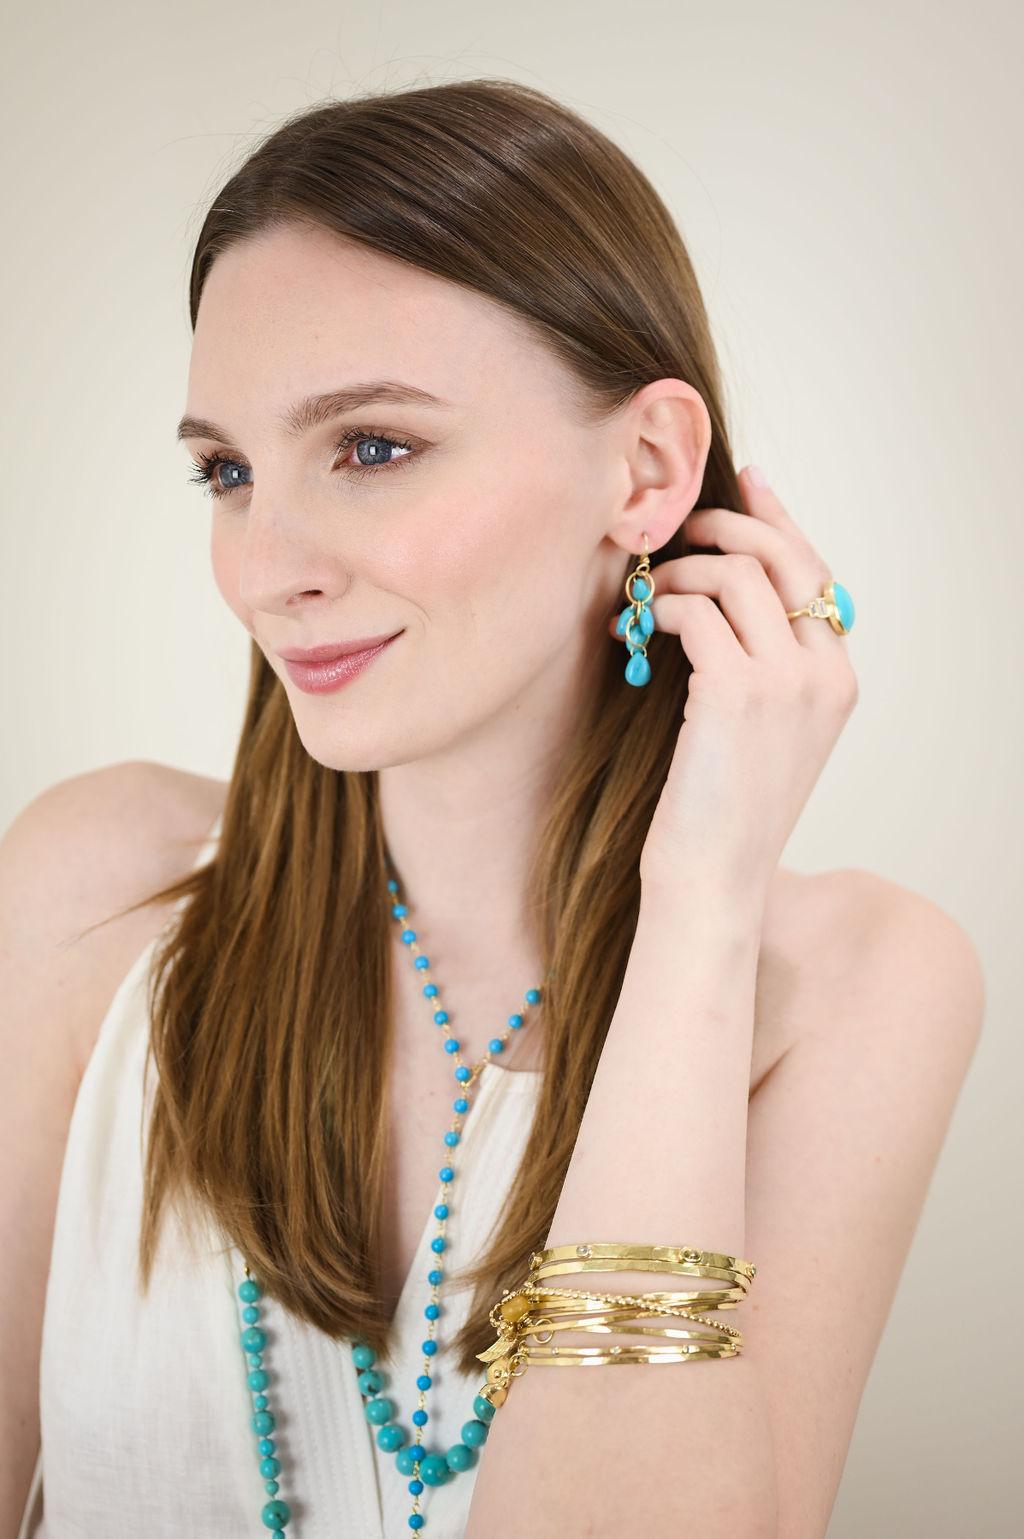 Handwrapped in 18 karat gold*, Faye Kim's Turquoise Oval Bead Lariat Necklace can be adjusted to be worn at various lengths, making it the perfect complement to any outfit. The stones' striking hue pops beautifully against black, white, or virtually